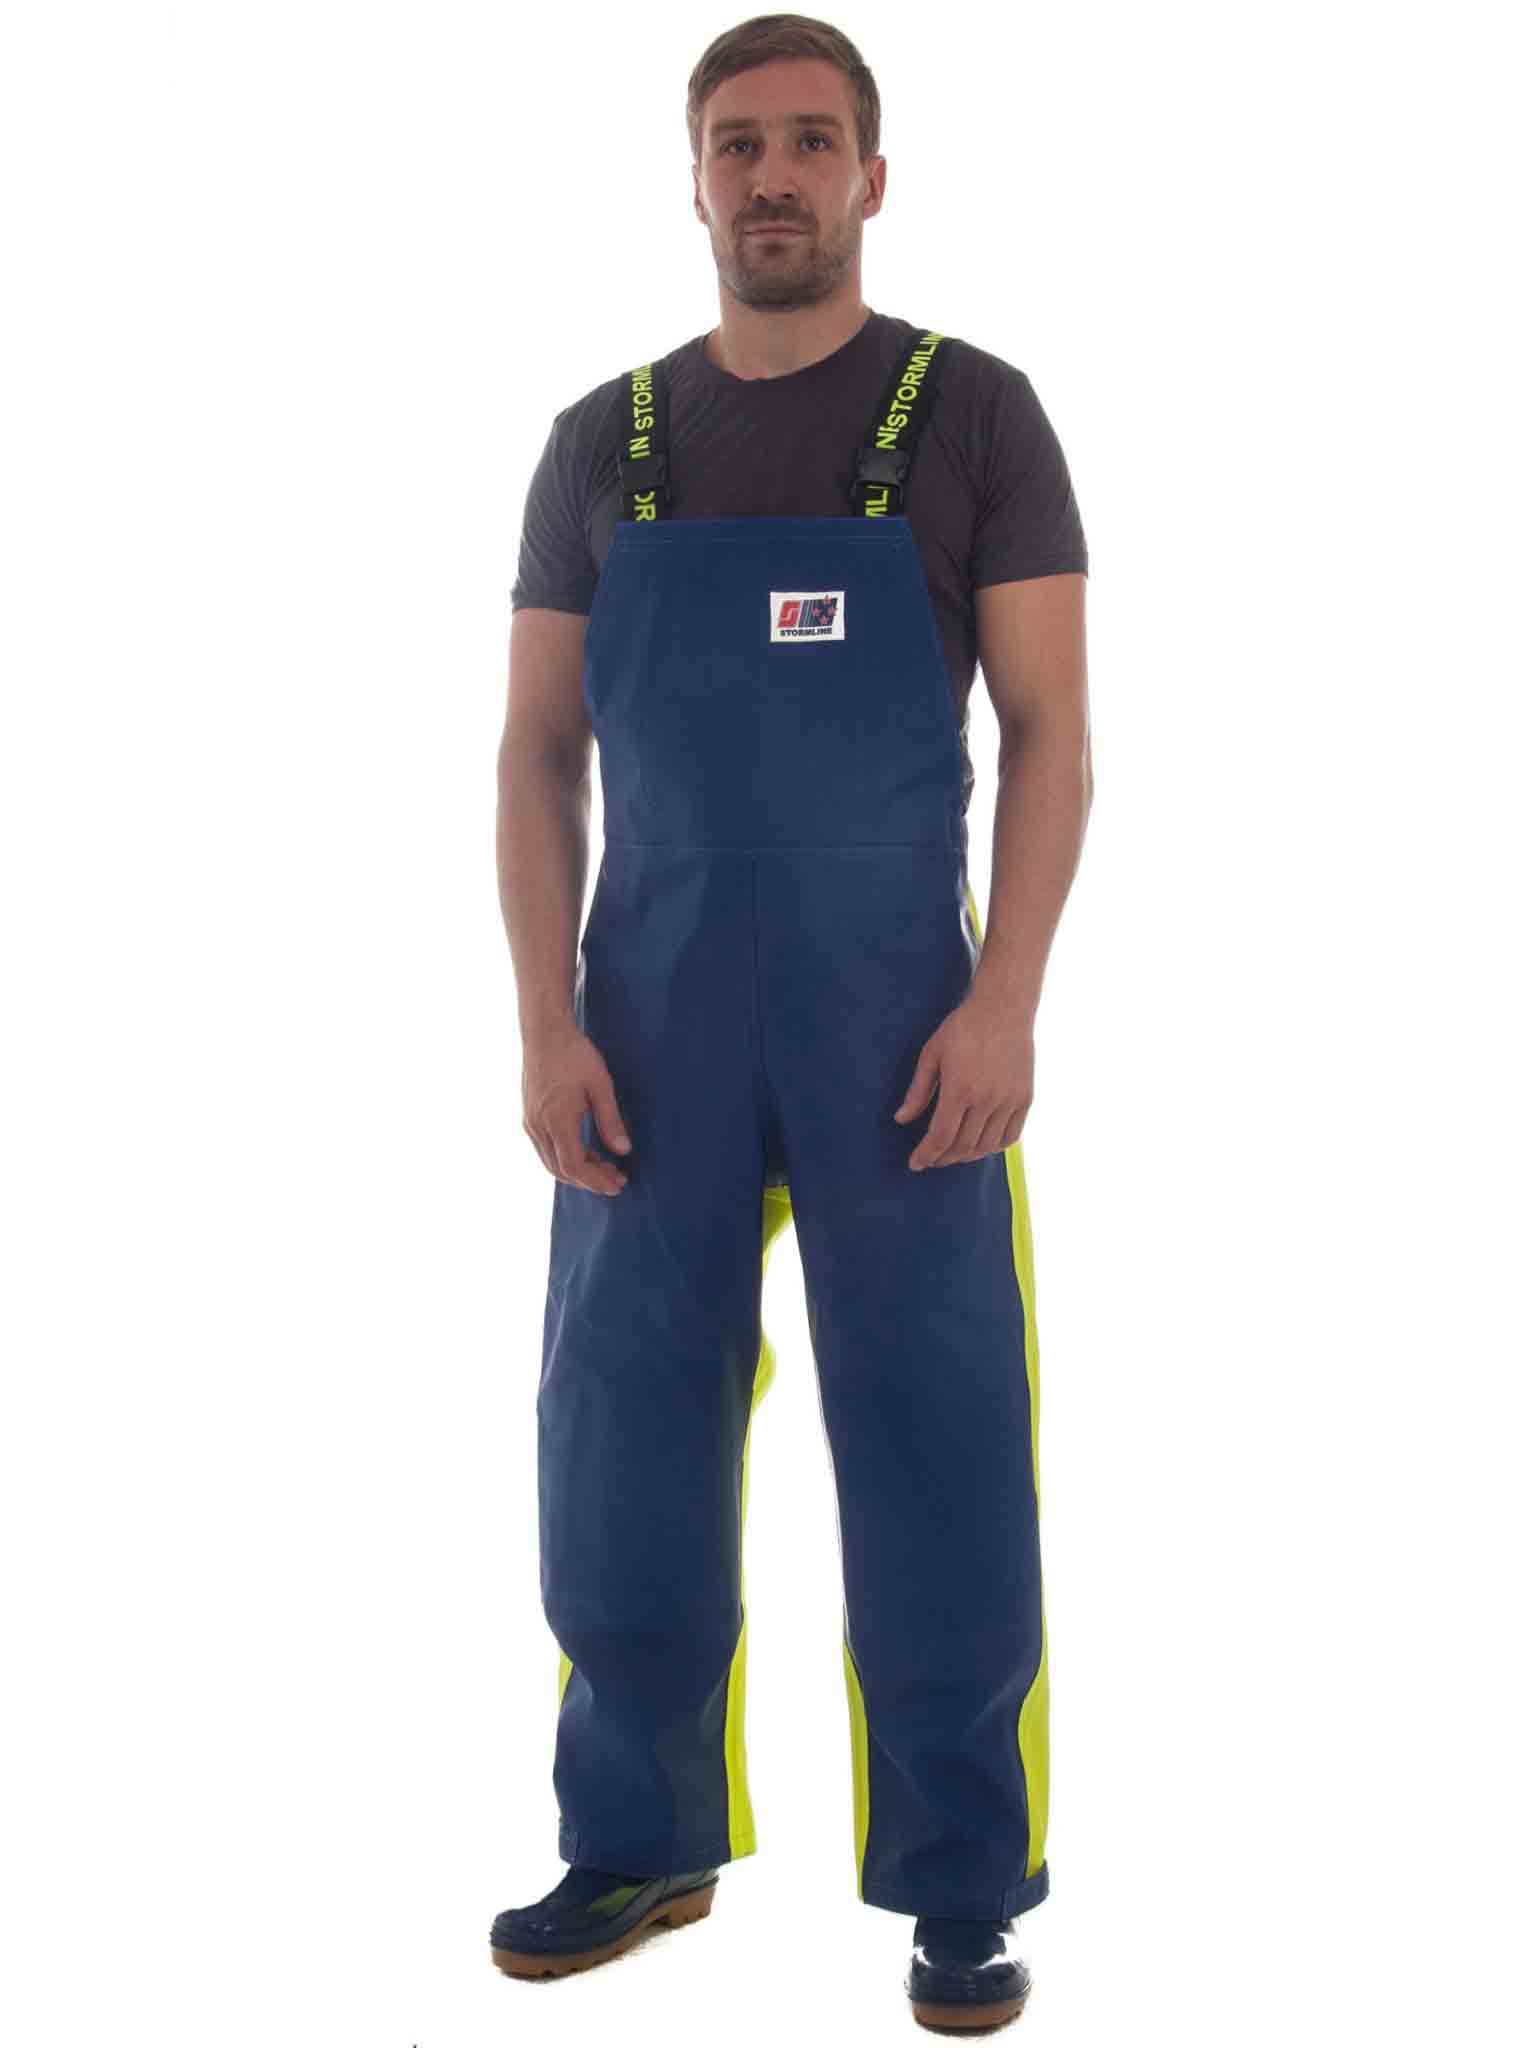 WATERPROOF BIB AND BRACE,QUALITY BREATHABLE,TROUSERS,COVERALL,FARM,WORK,RAIN,WET 